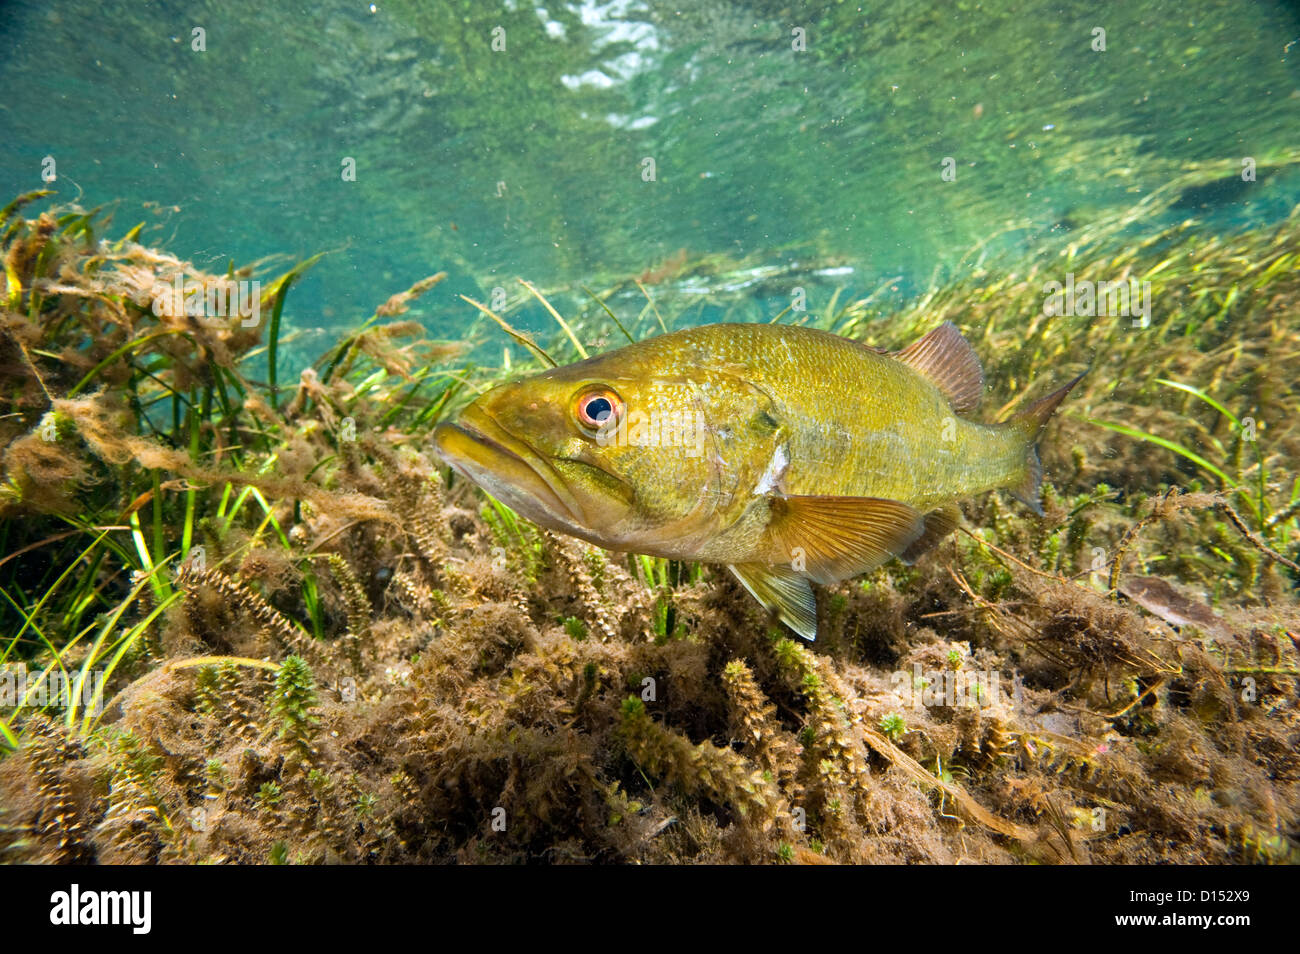 A male Large mouth bass, Micropterus salmoides, protects his nest in the Rainbow River in Northwest Florida, United States. Stock Photo